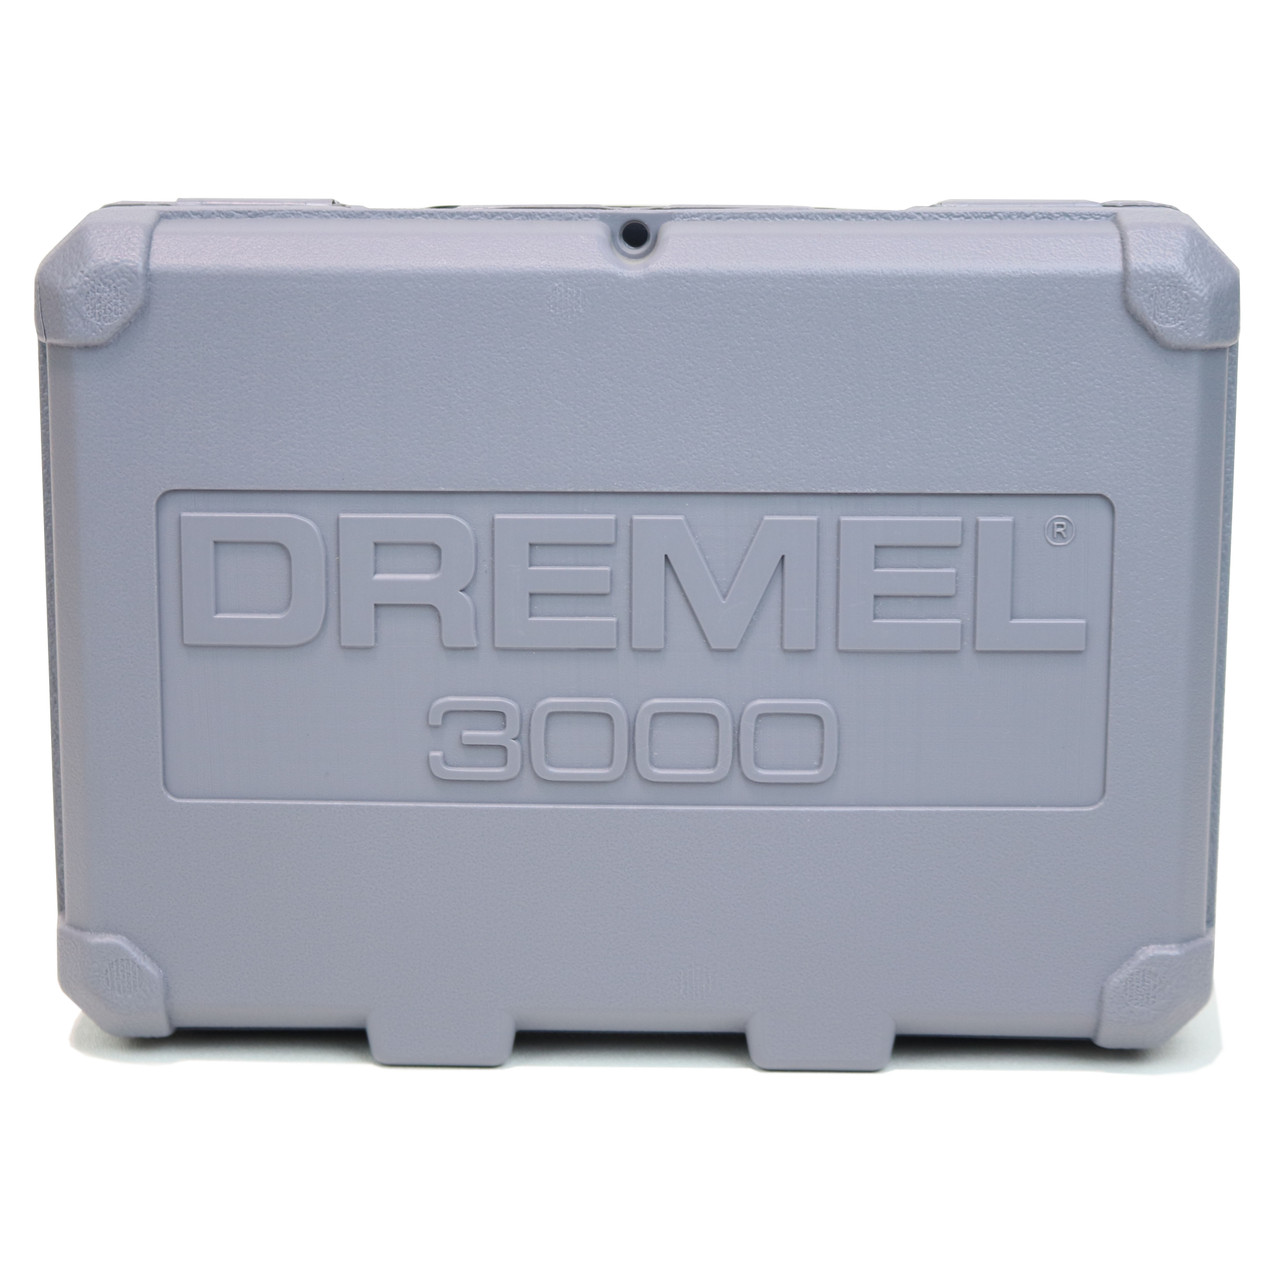 Dremel 3000-DR-RT 1.2 Amp Variable Speed Rotary Tool Kit/ FREE Carry Case -   Norway